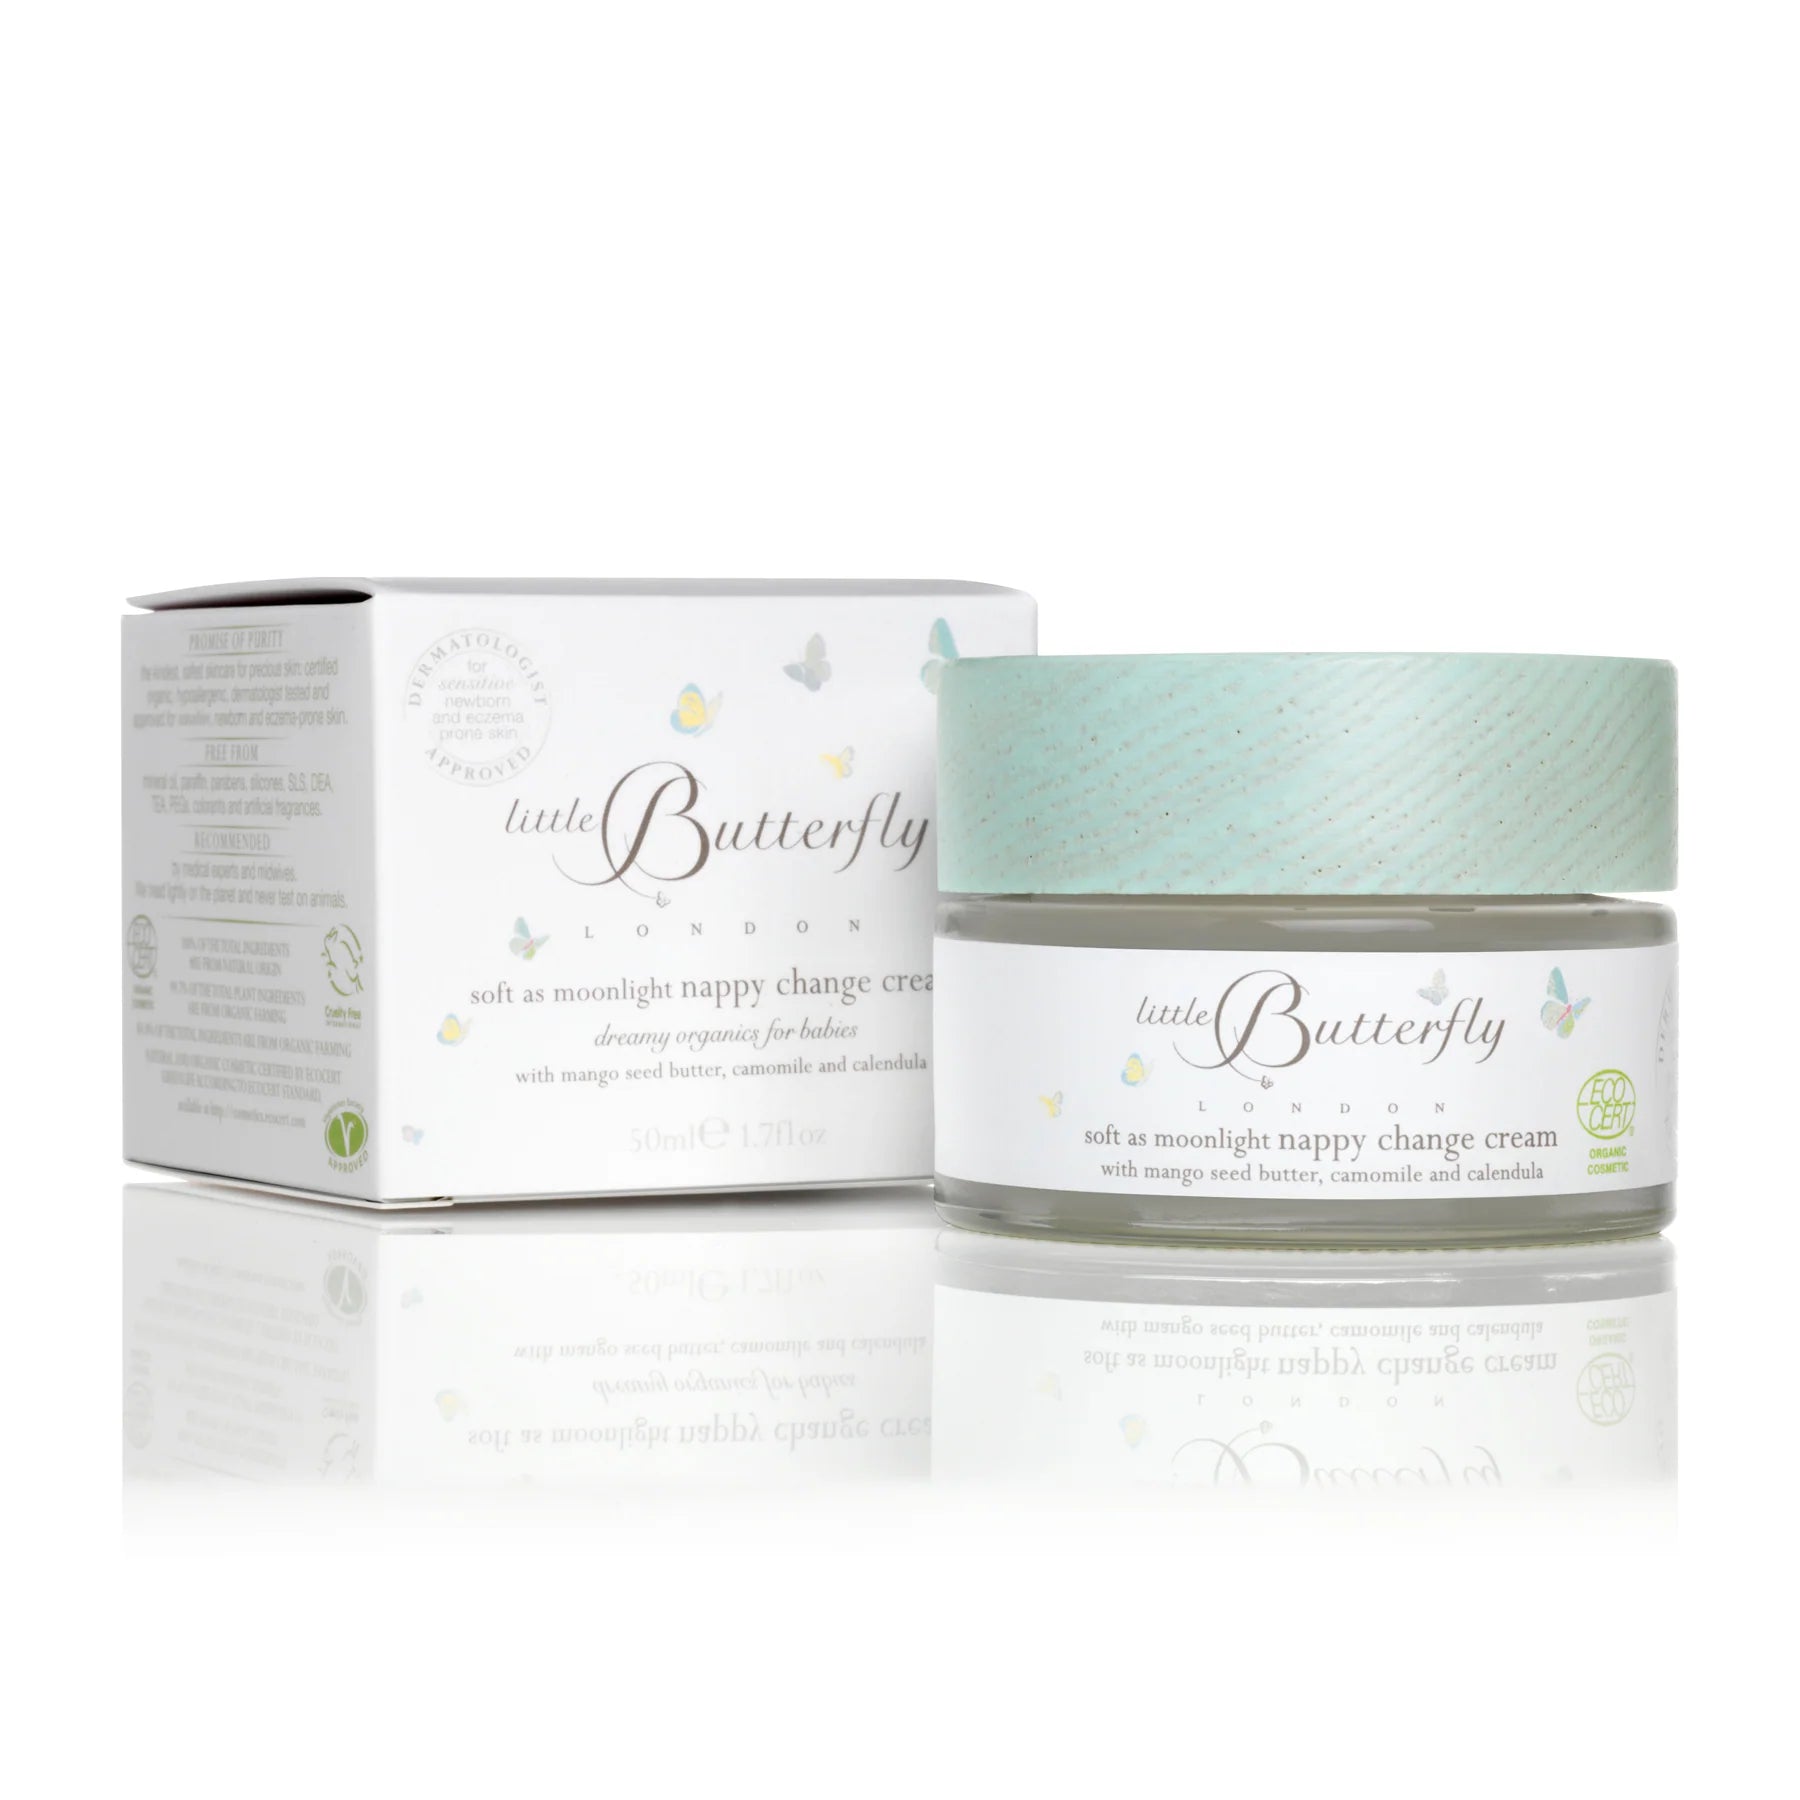 Featuring a delicately soft, sweet scent of lavender, chamomile, nectarine and bergamot, the Nappy Cream – Soft As Moonlight by Little Butterfly London is a luxurious yet effective cream for calming and soothing sore delicate baby skin. 